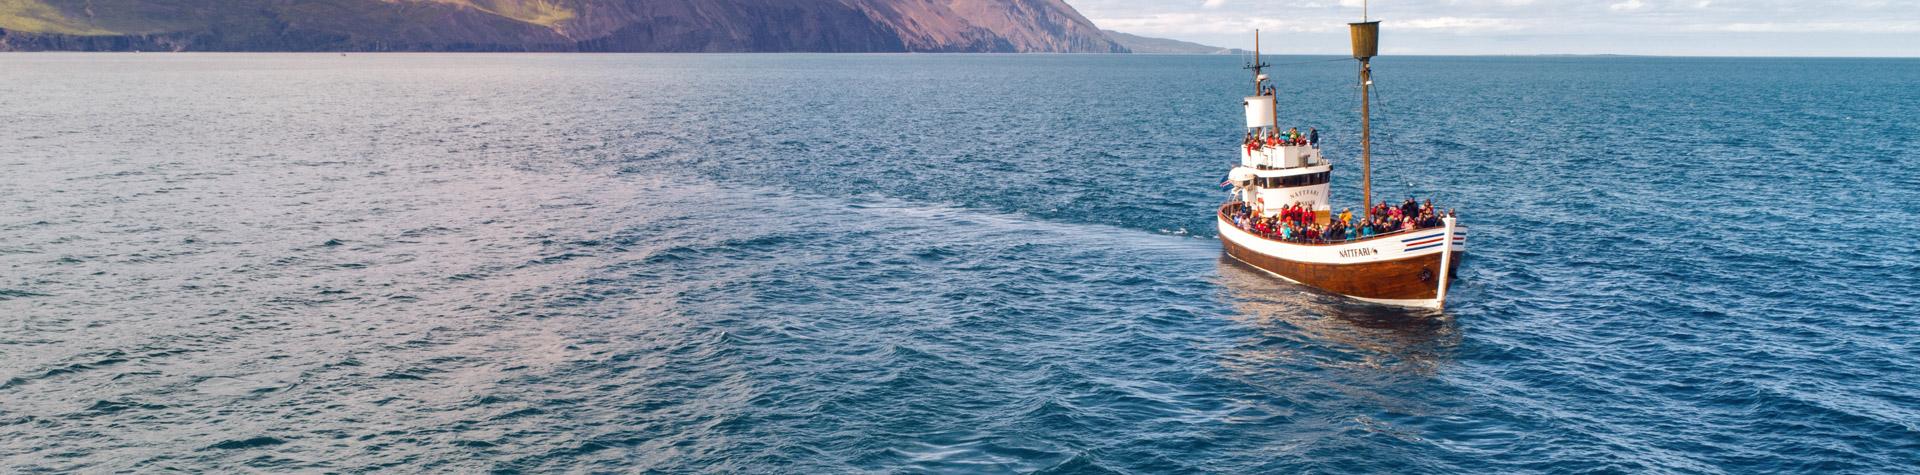 Whale watching in Iceland.